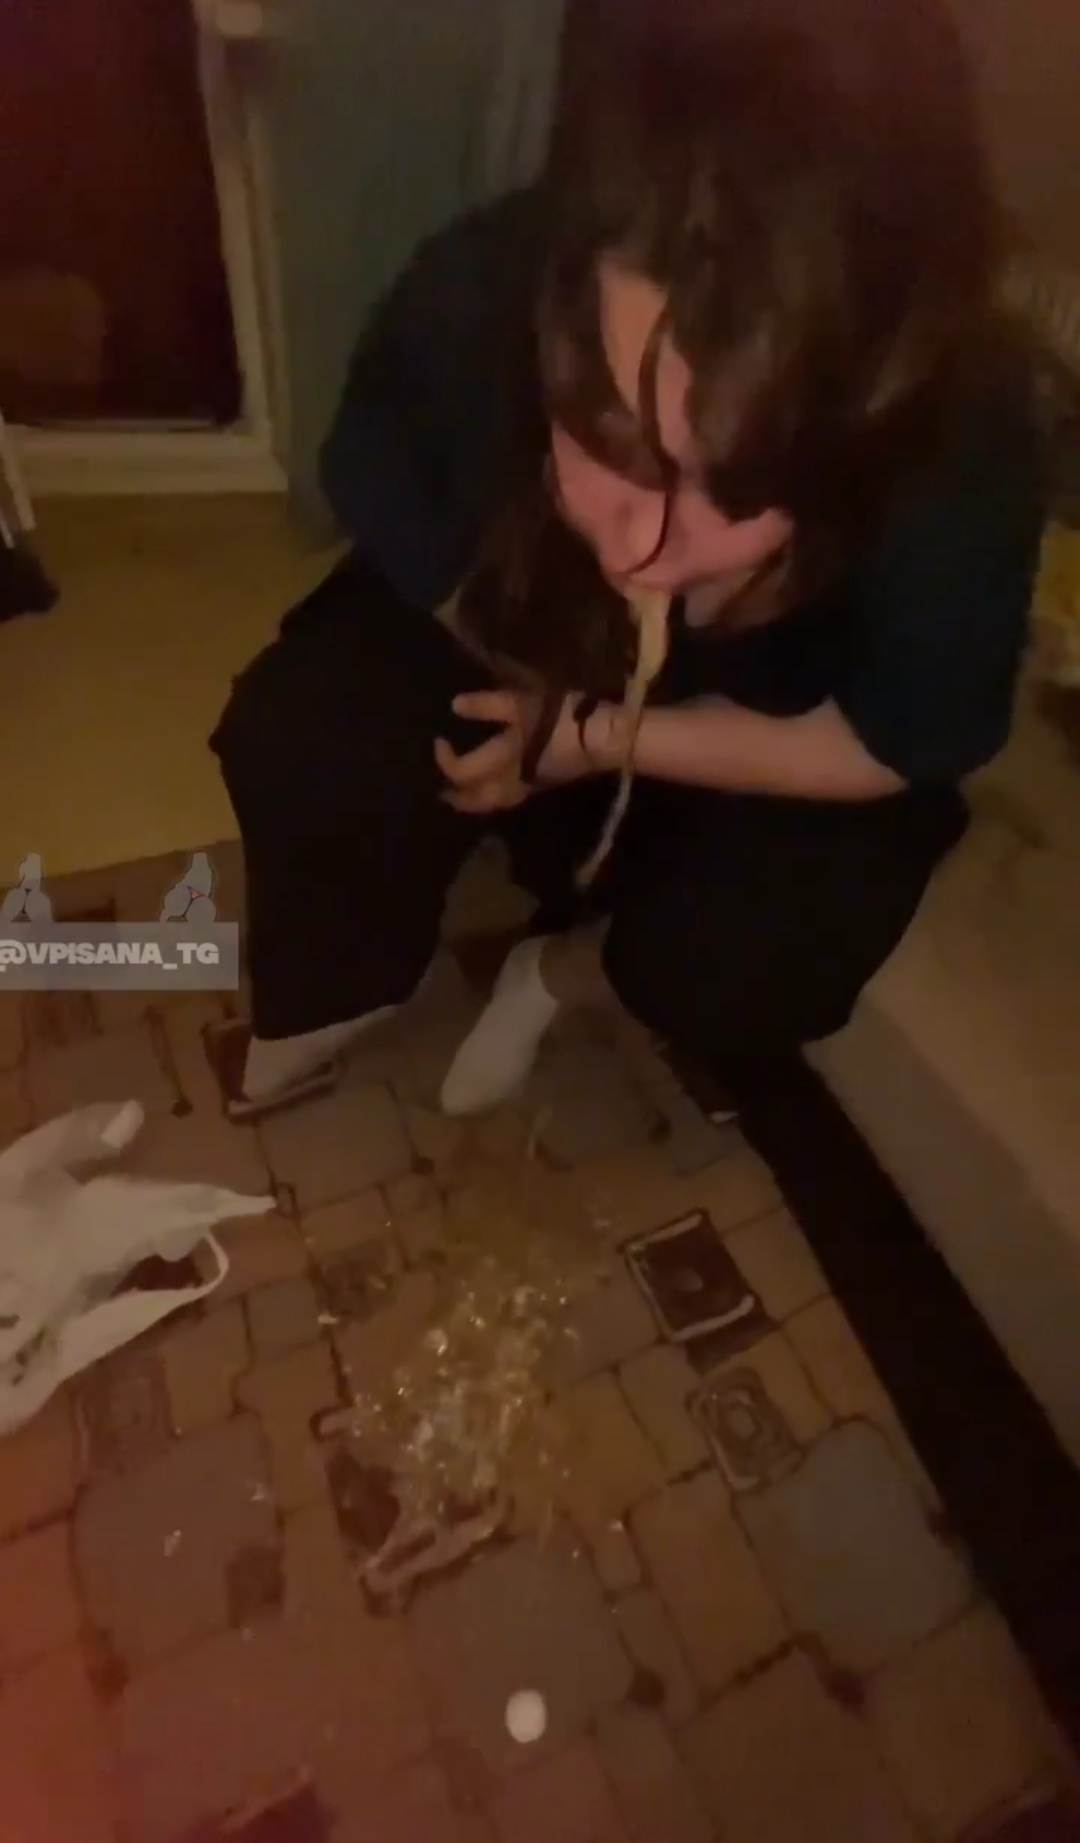 Drunk, puking girl at the entrance